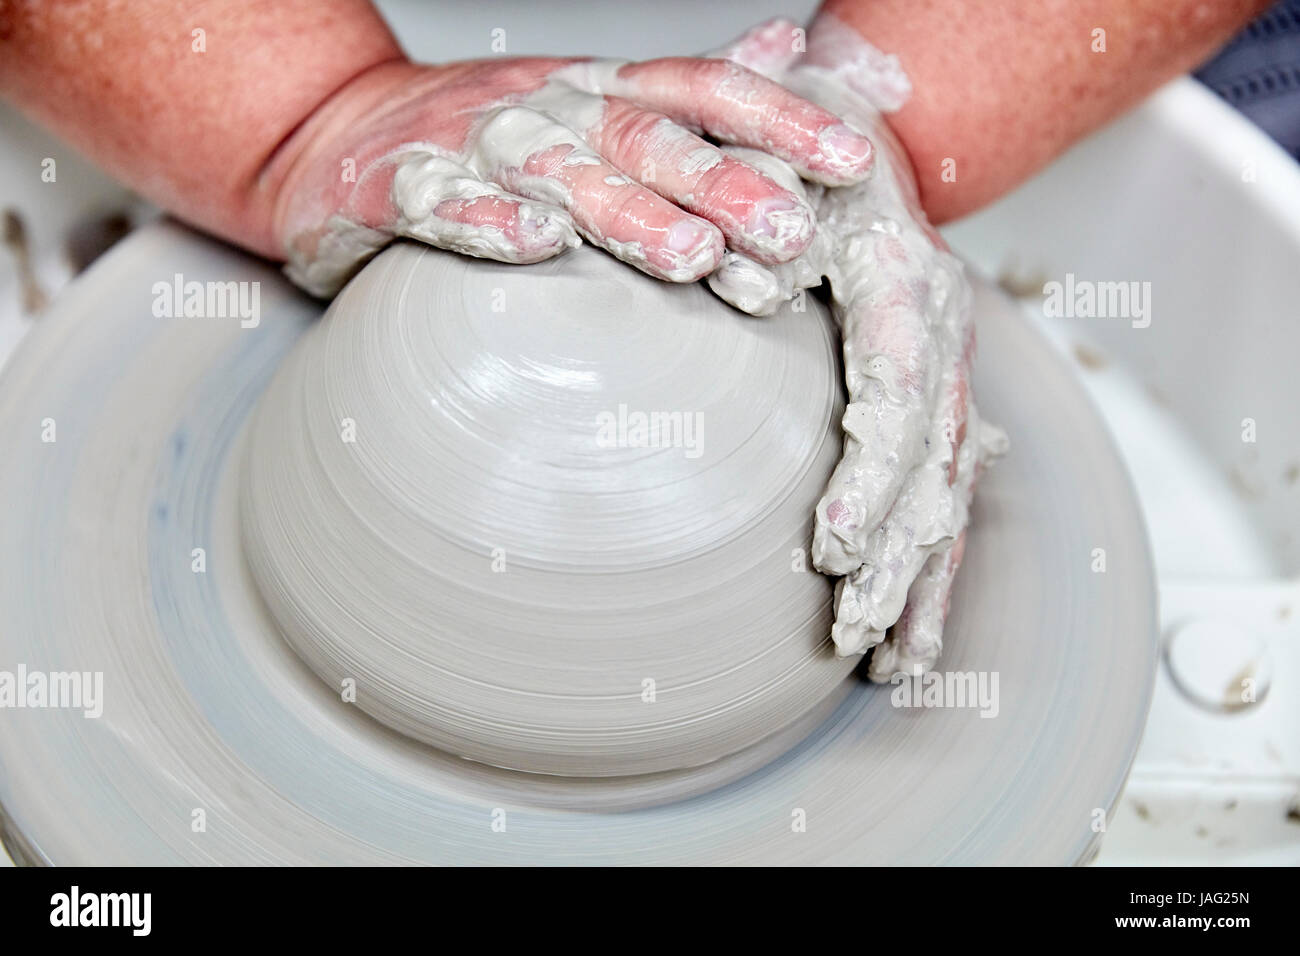 A person using a turning pottery wheel to throw a pot using clay, hands moulding the wet clay. Initial stage of throwing a pot. Stock Photo